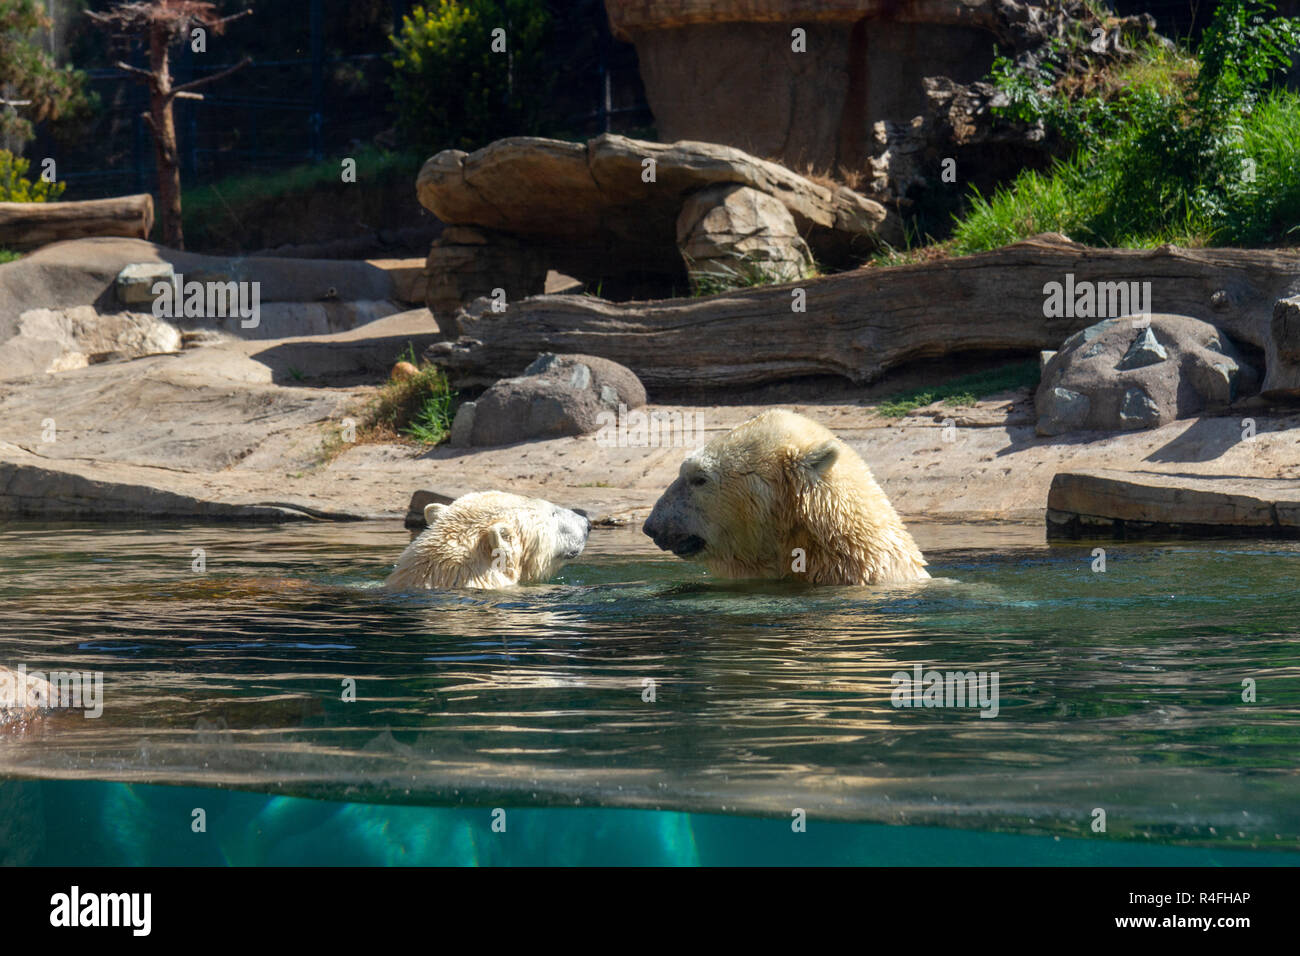 A pair of polar bears swimming in their enclosure, San Diego Zoo, California, United States. Stock Photo